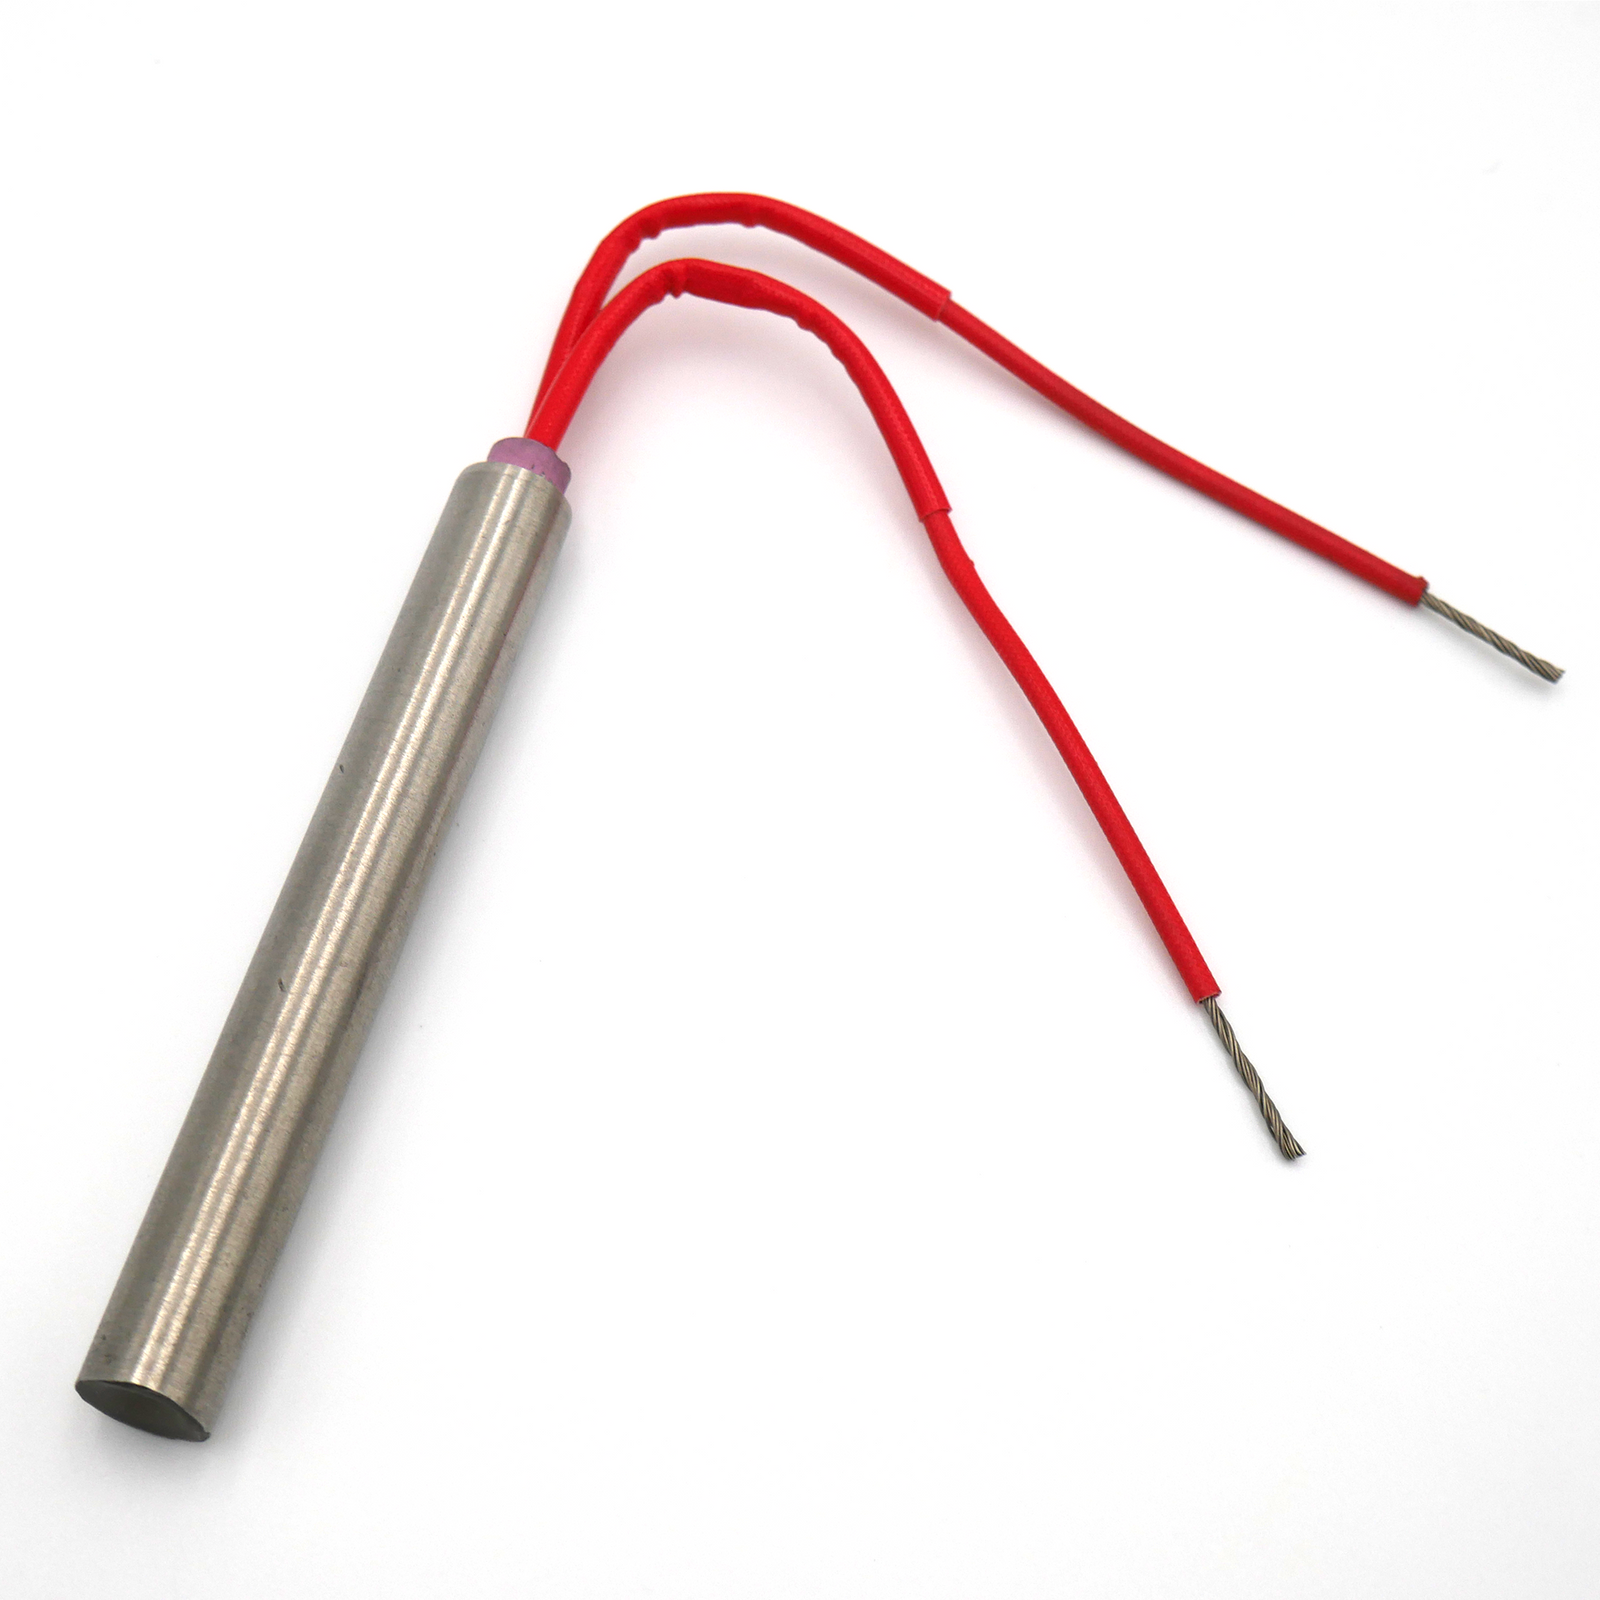 12mm Heating Tube (110v-300w) replacement part for a continuous band sealer. 